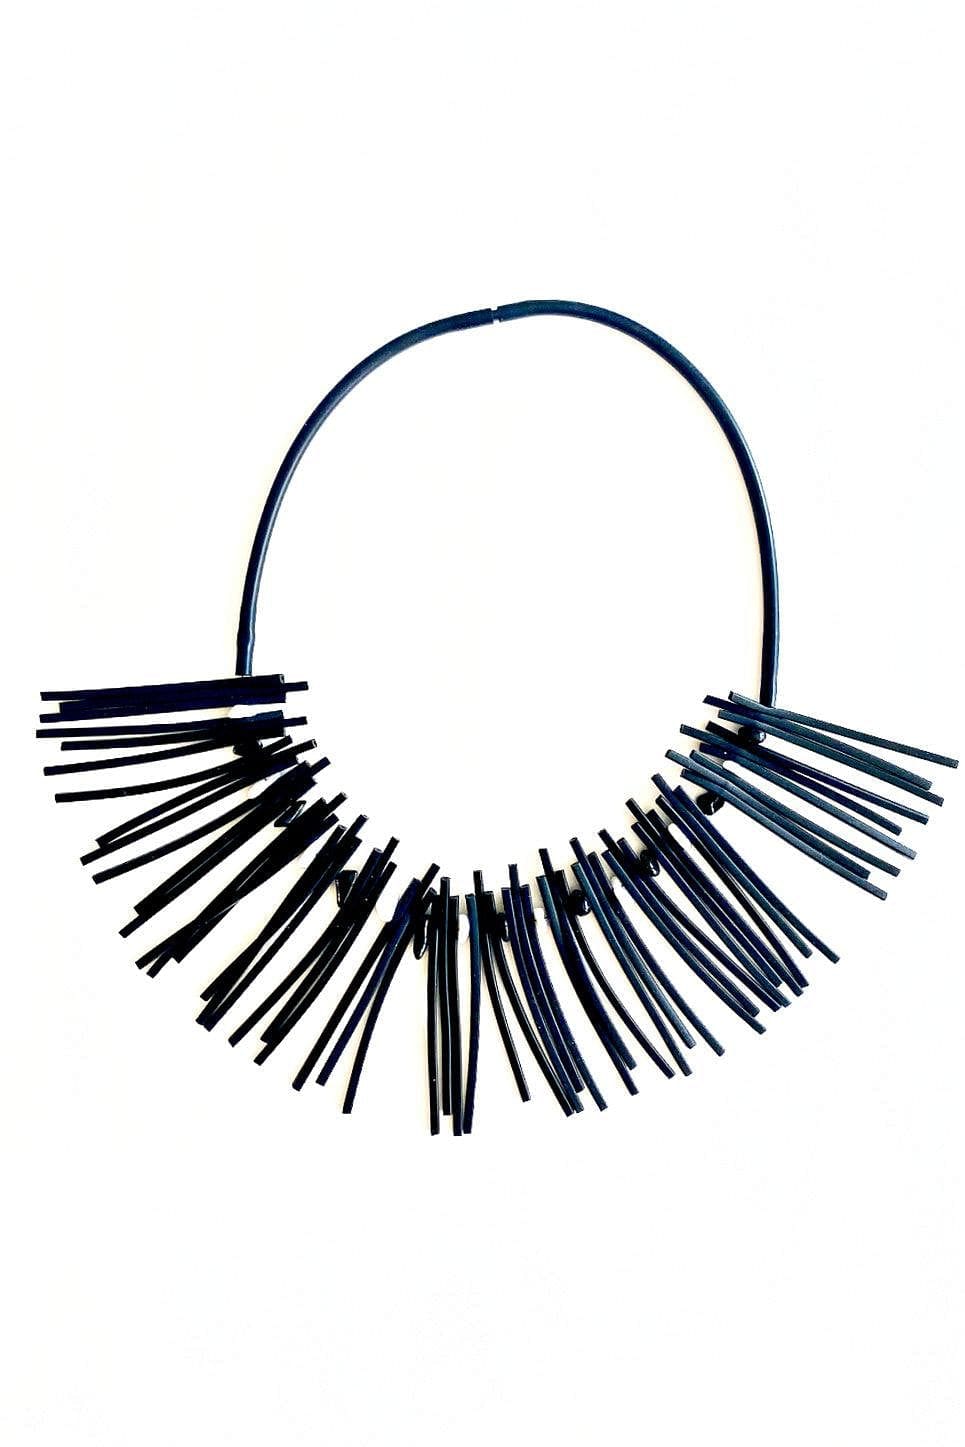 Chips Necklace show on a white background. Black rubber with black beads. 